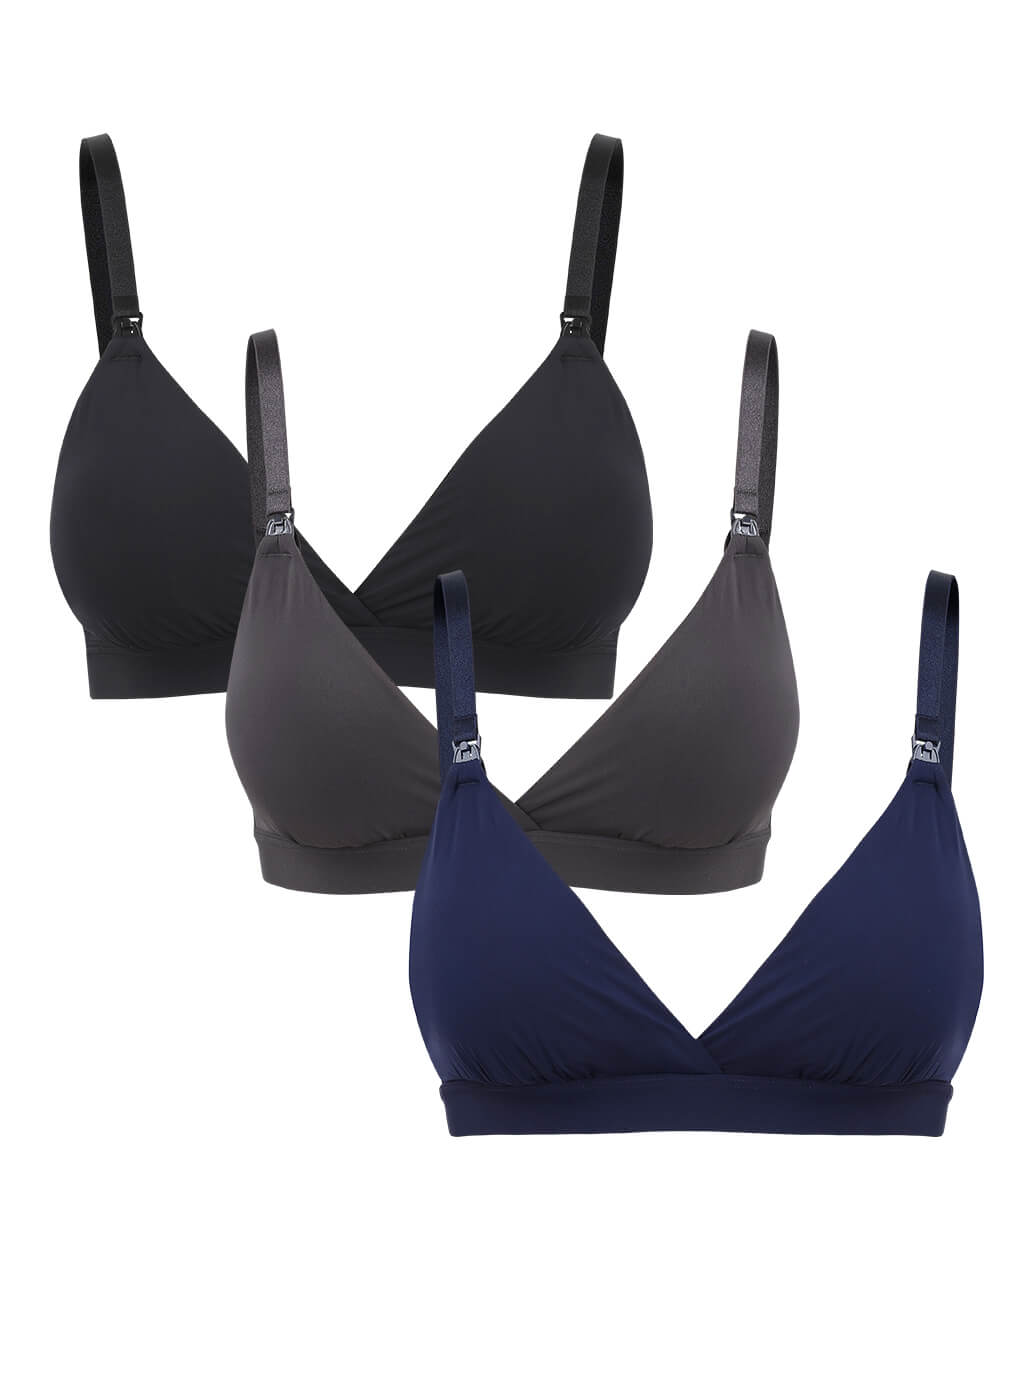 Nursing Bras Singapore: The Buying Guide For New Mums - Lovemere